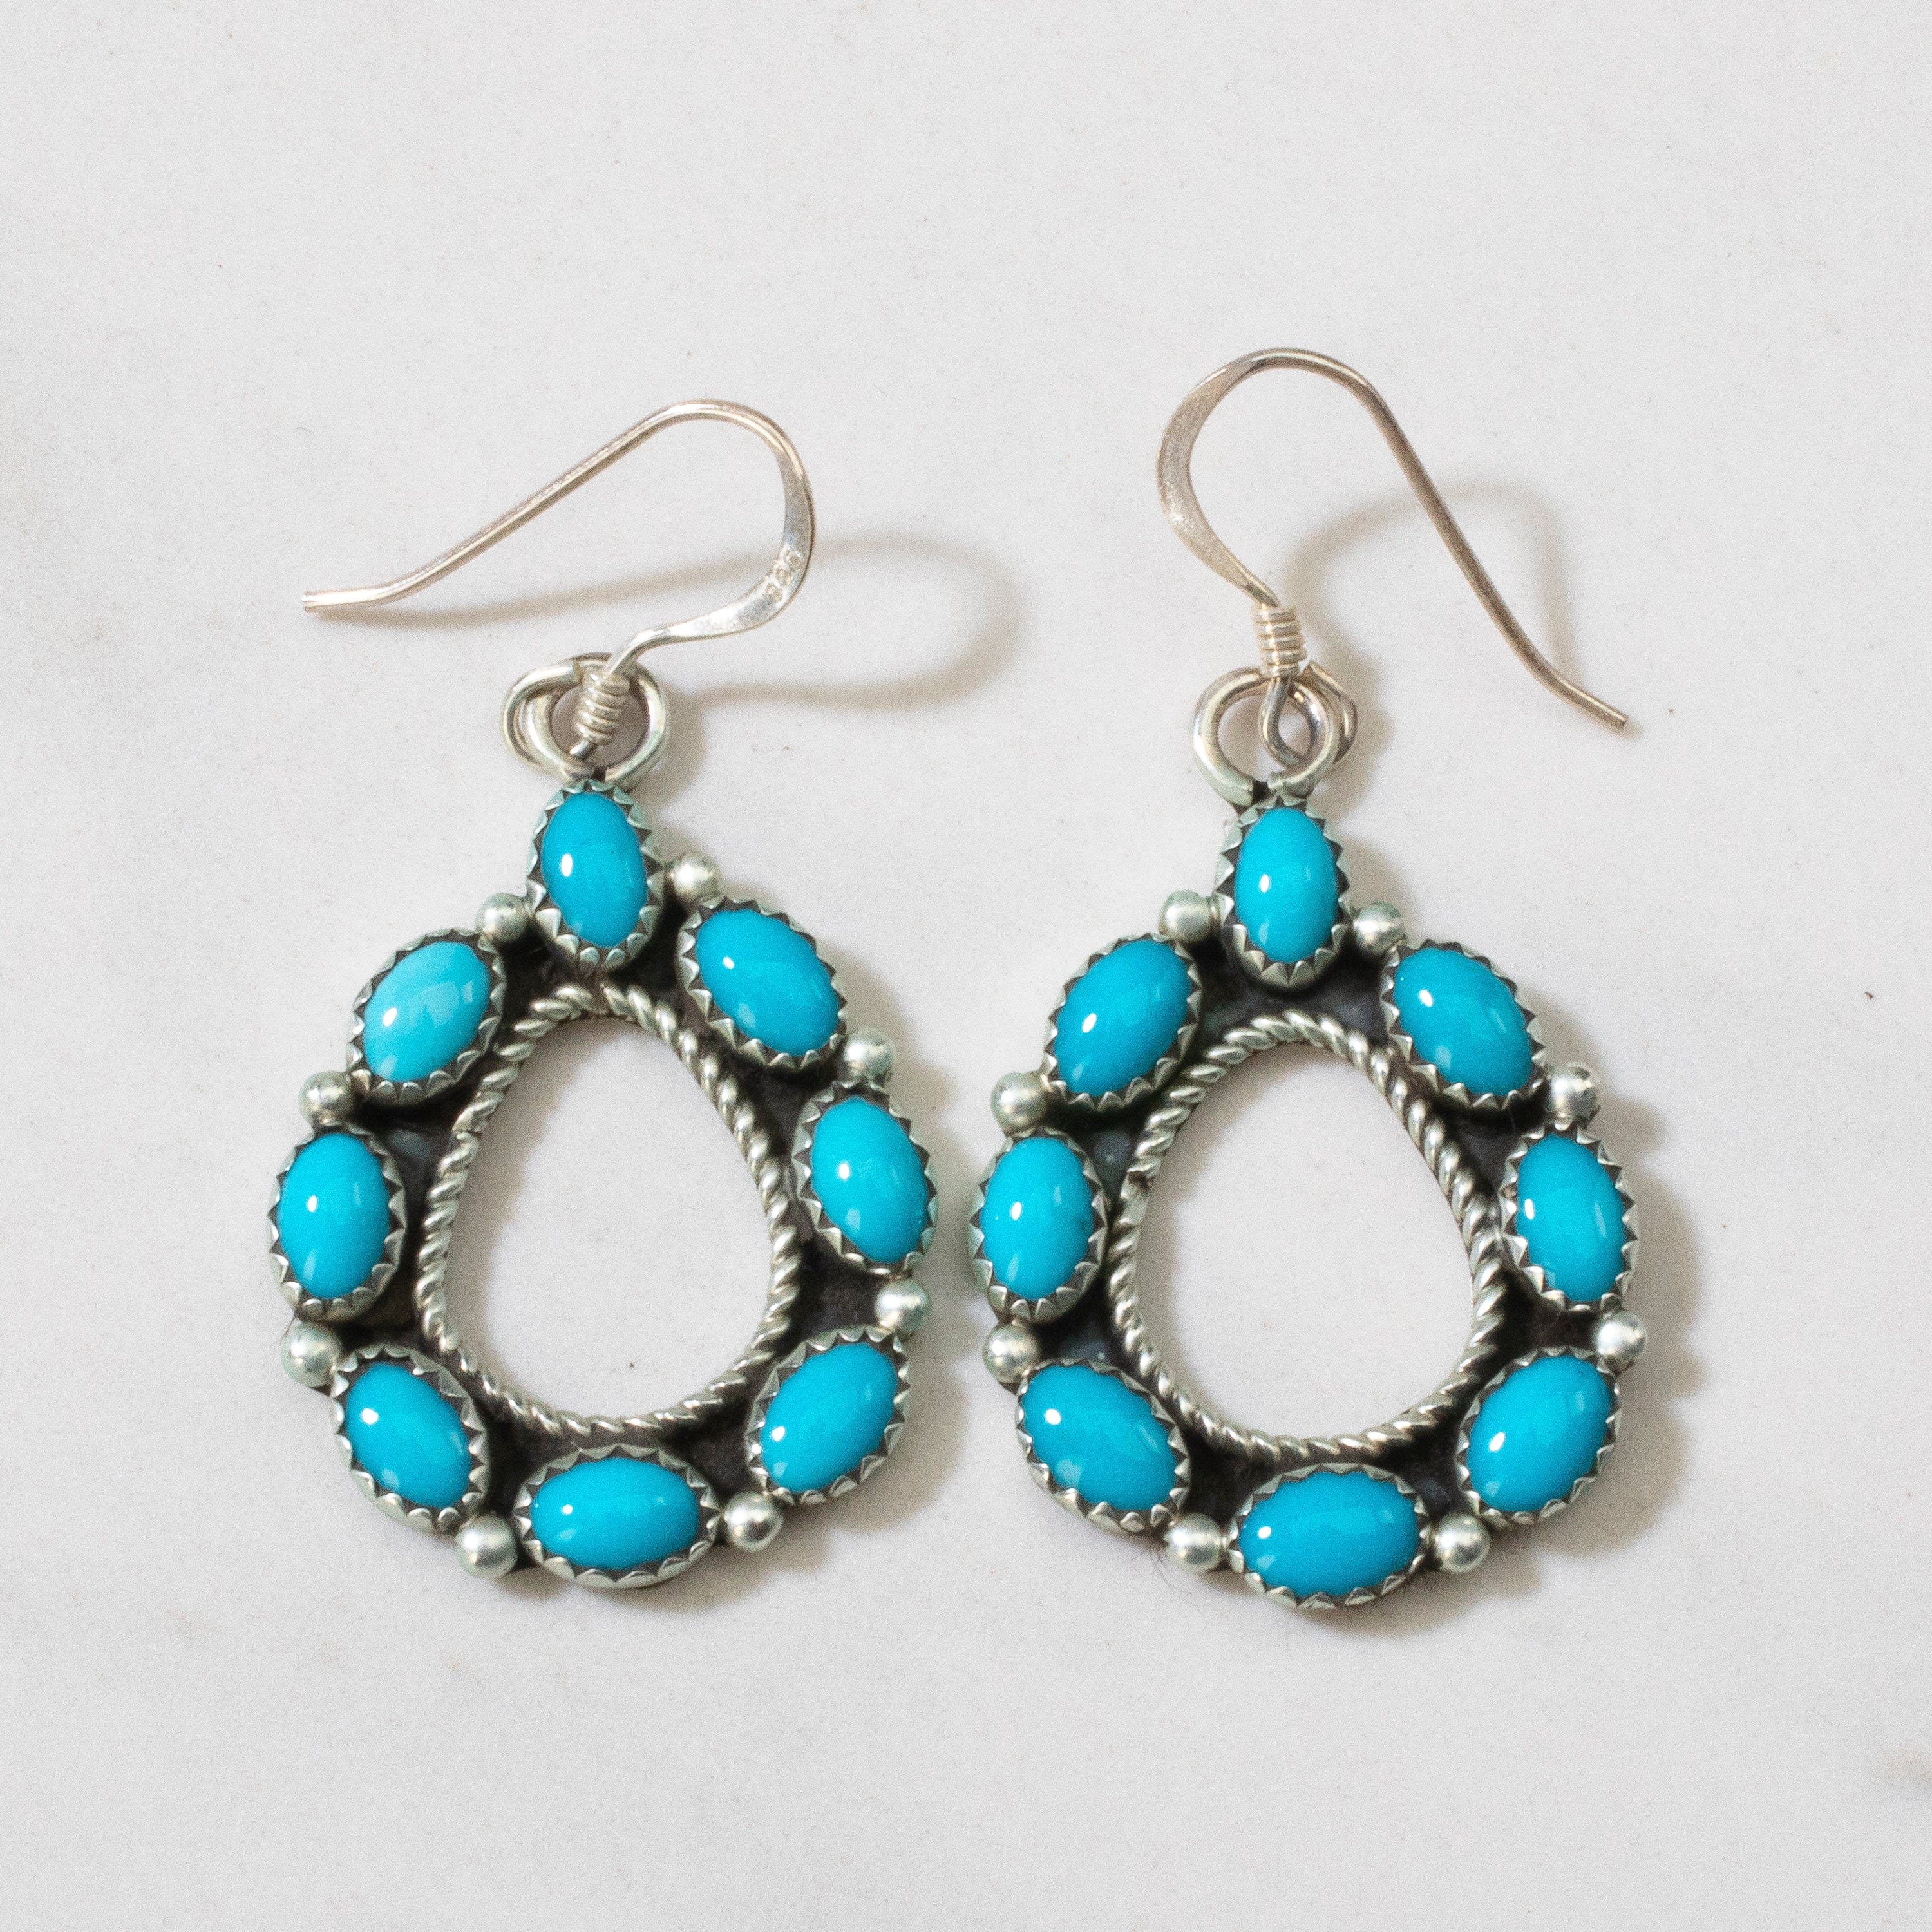 Kalifano Native American Jewelry Sleeping Beauty Turquoise Teardrop Navajo USA Native American Made 925 Sterling Silver Earrings with French Hook NAE700.007